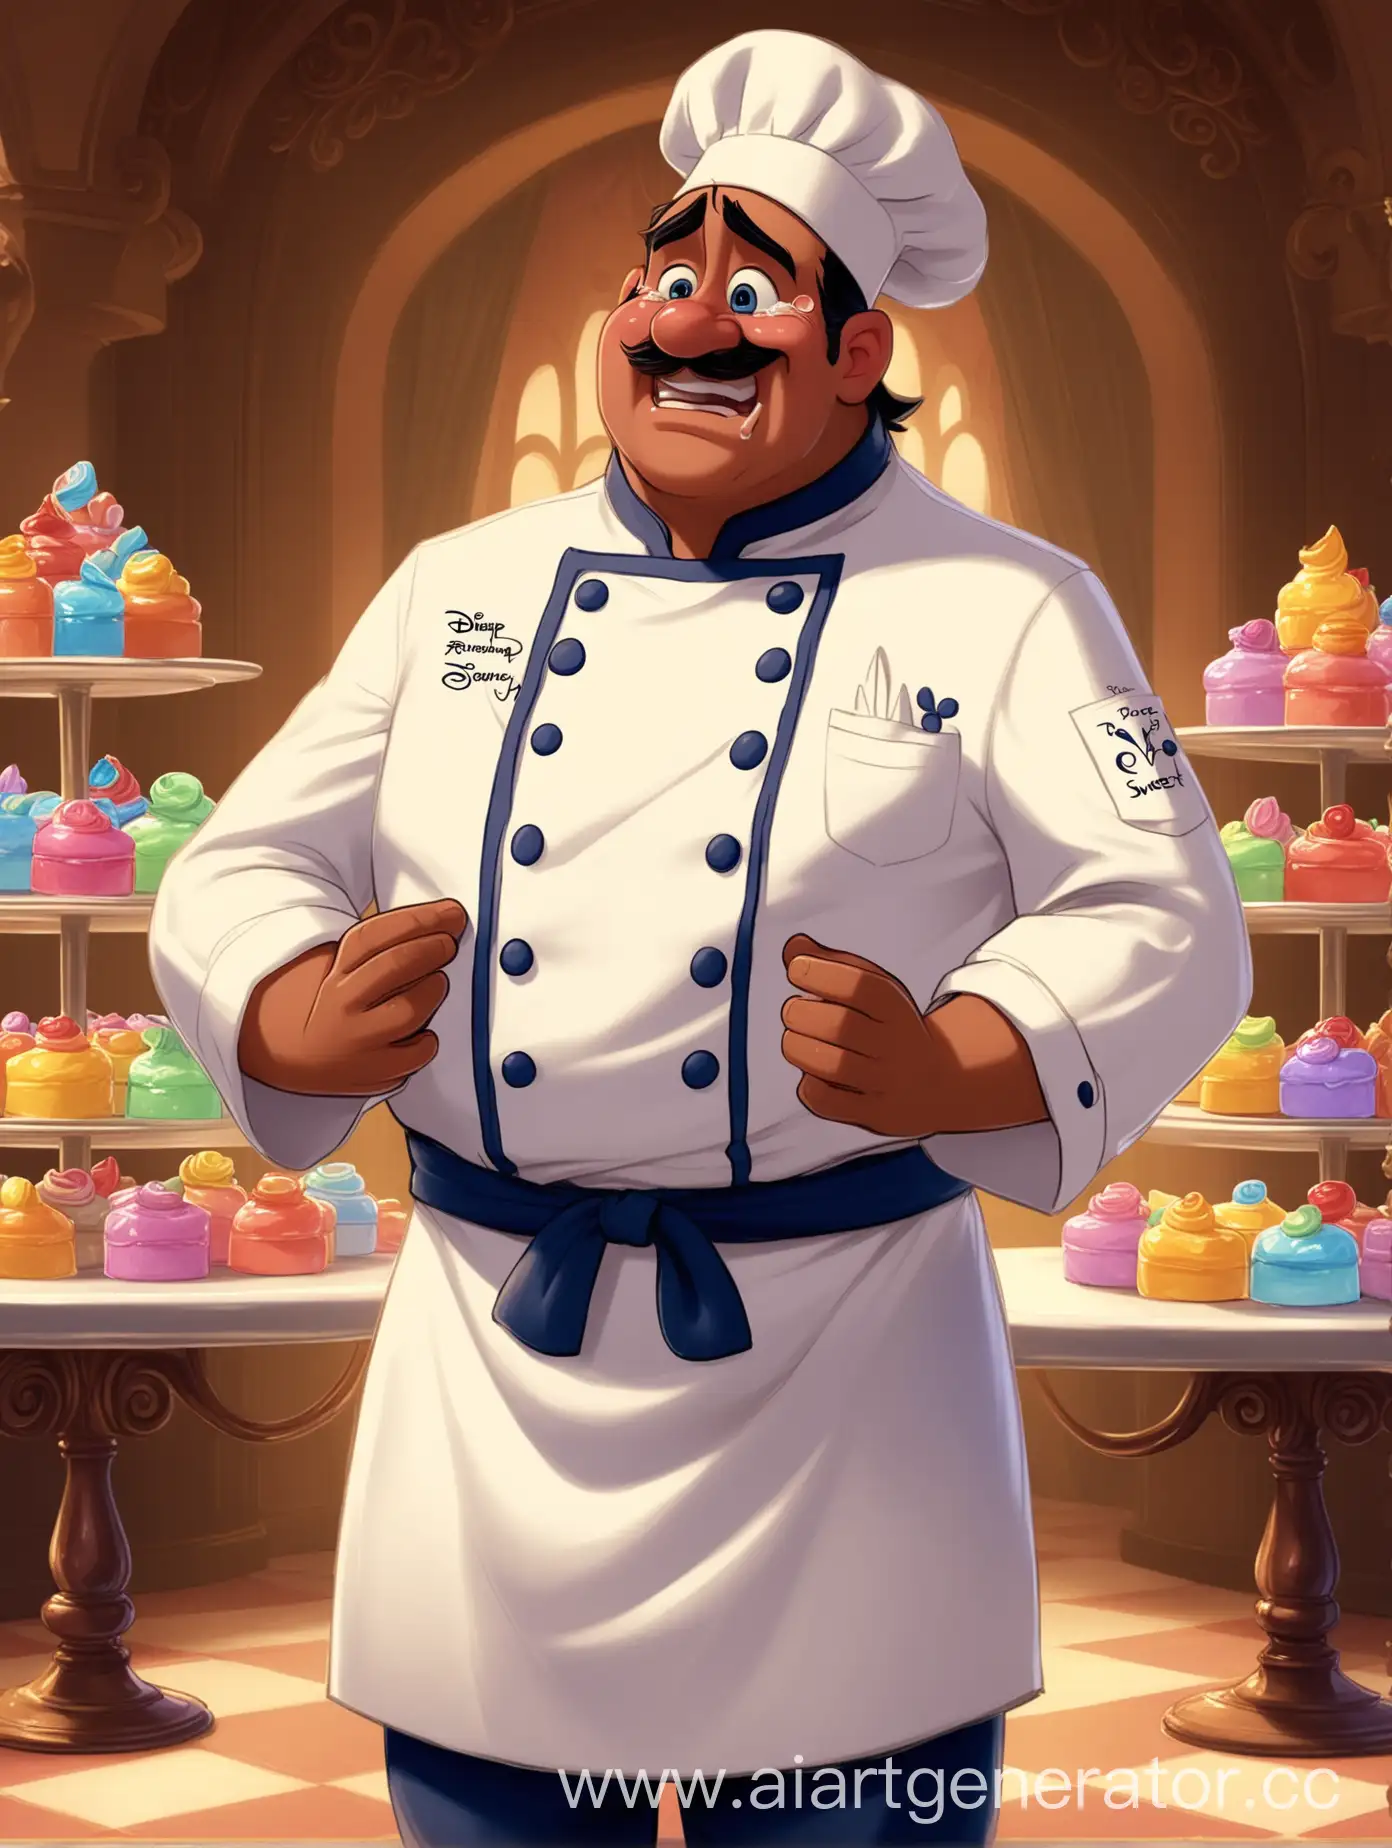 Disney-Chef-of-Sweets-Standing-Proudly-in-Tears